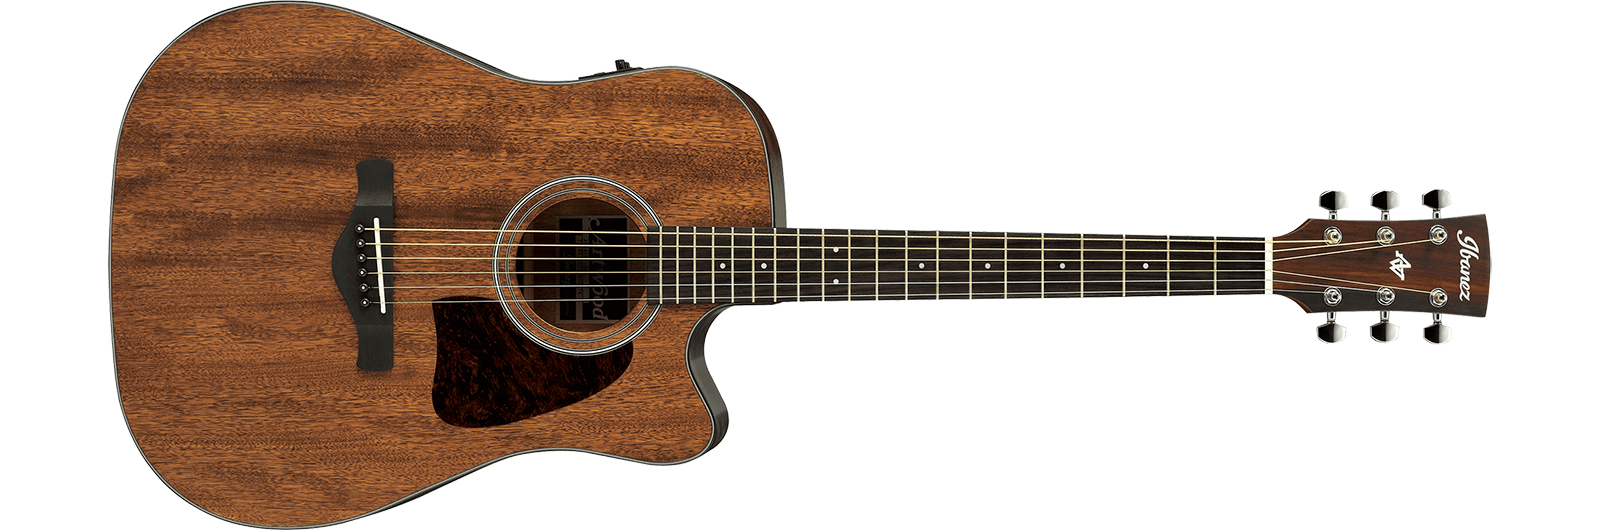 Ibanez AW54CEOPN Cutaway Dreadnought Acoustic/Electric Guitar - Open Pore Natural